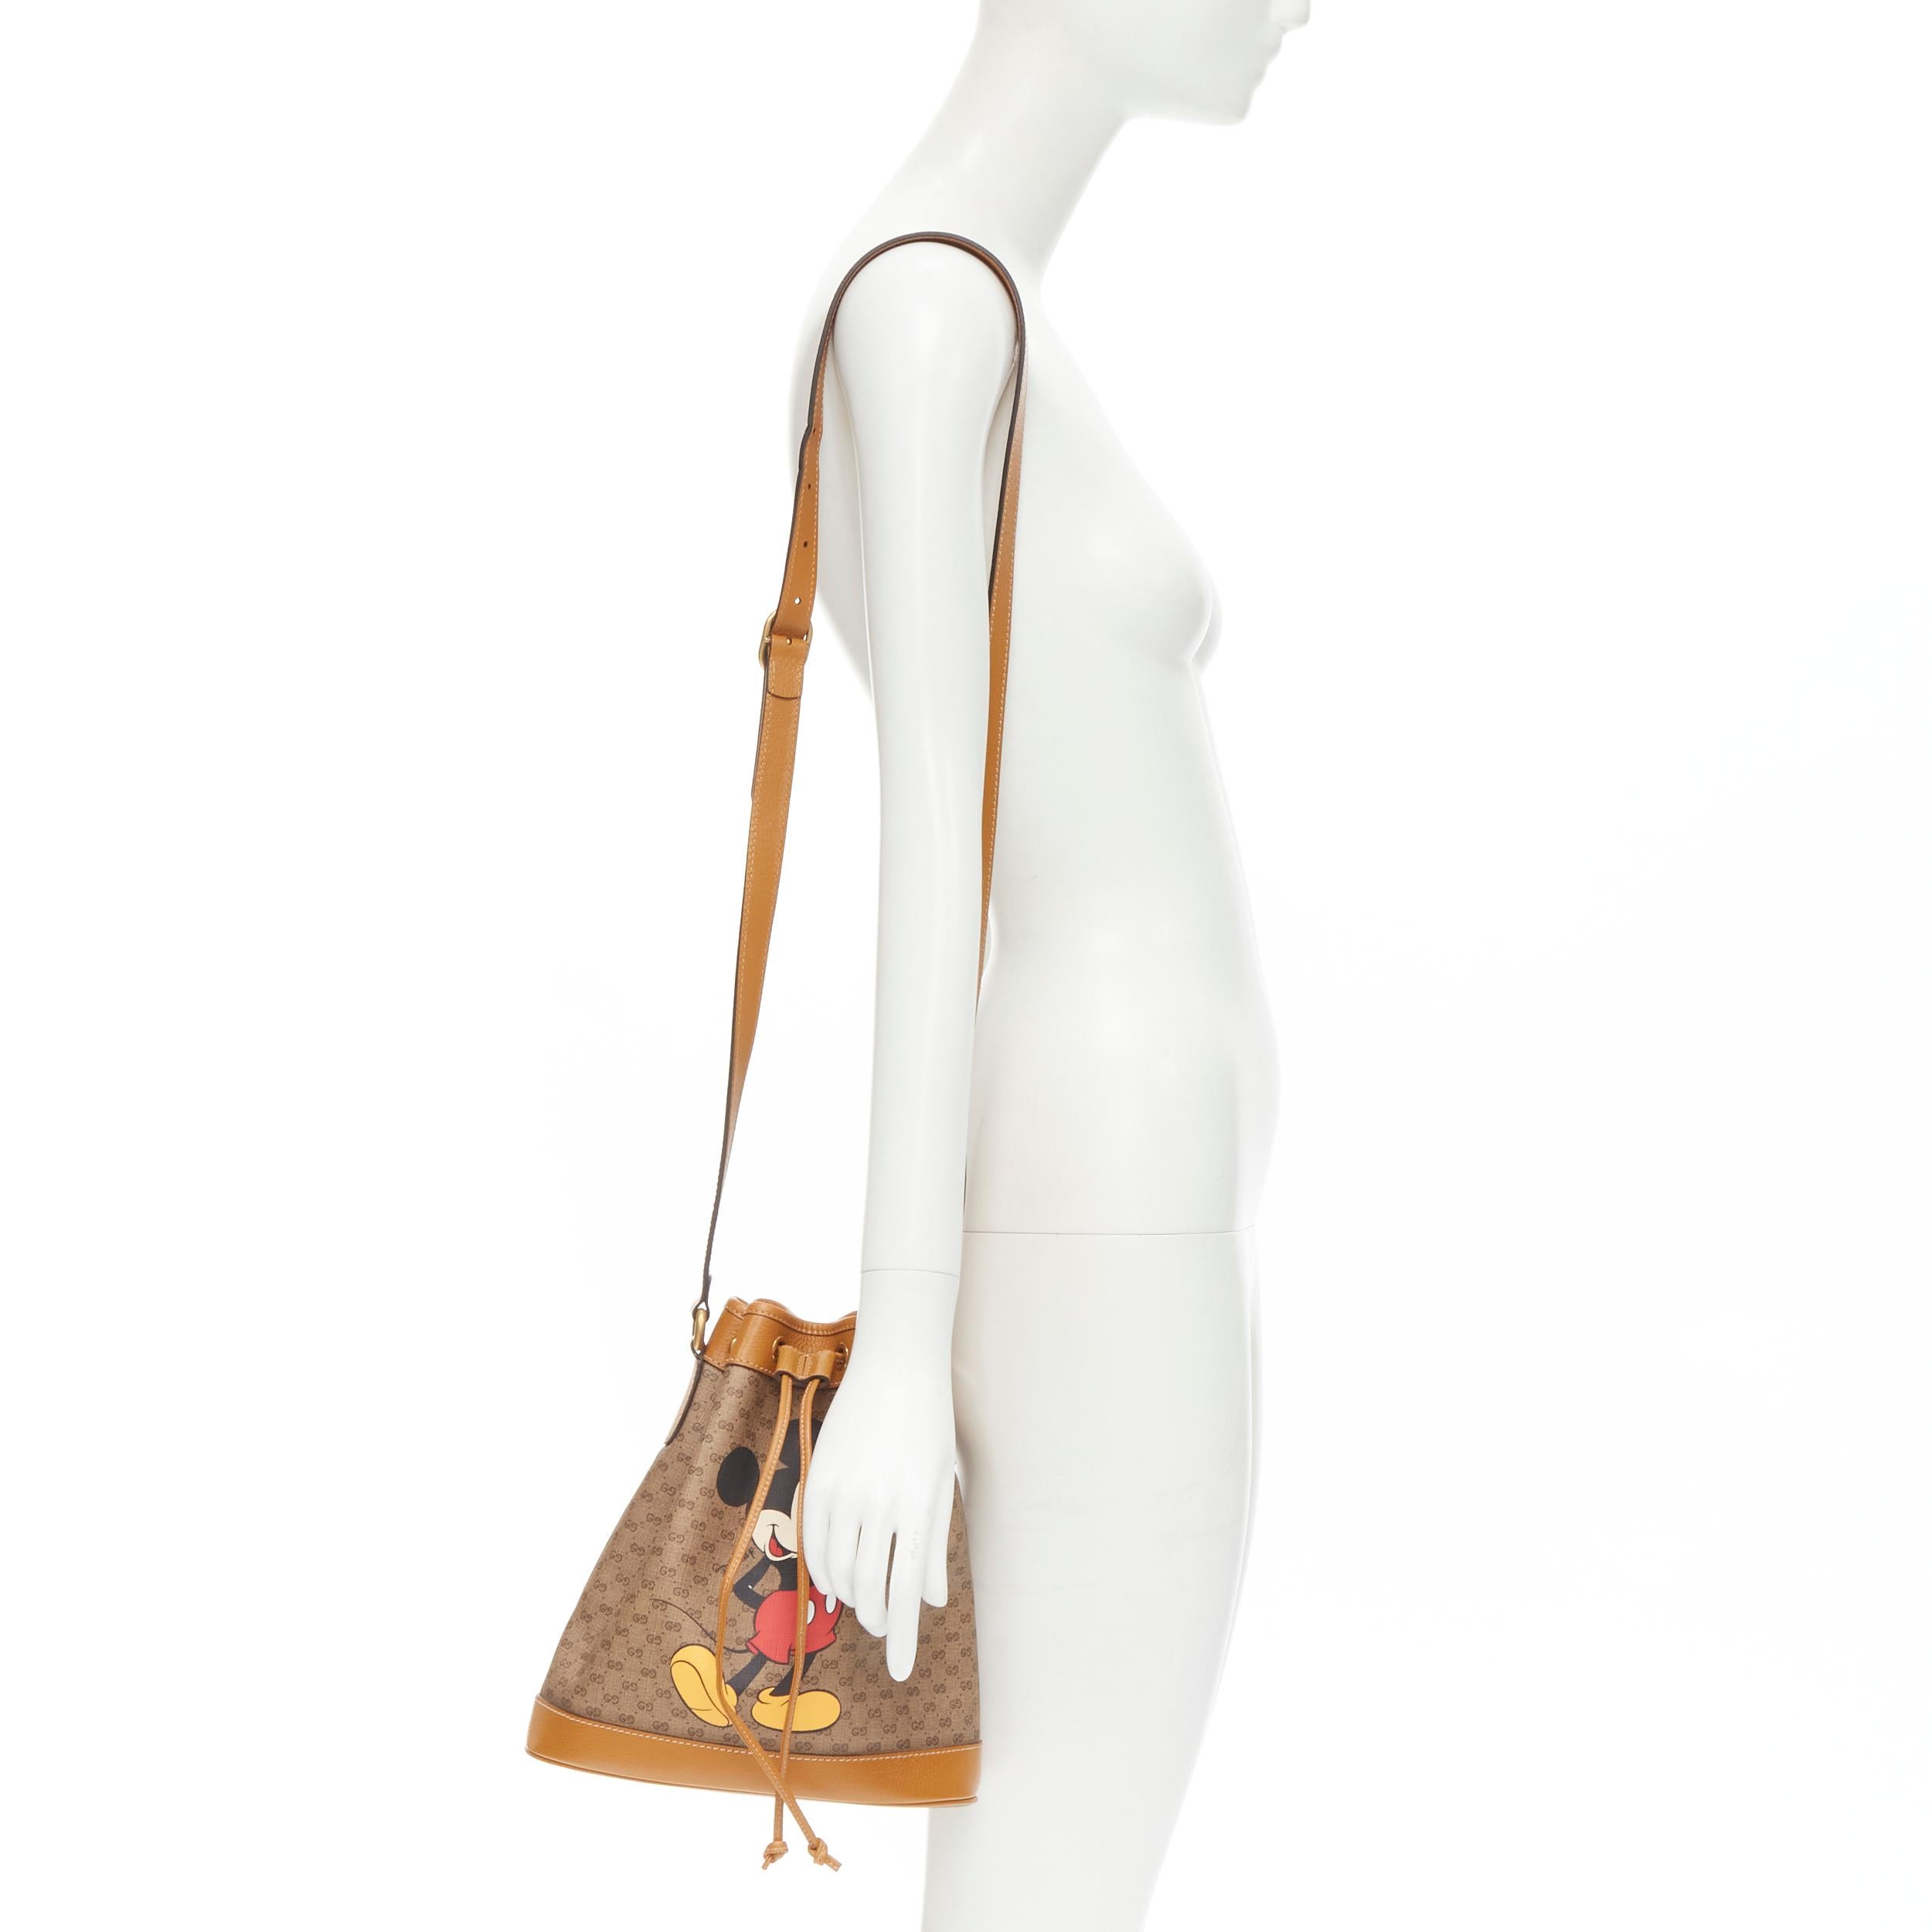 GUCCI DISNEY Candy GG Micky Mouse brown leather trim bucket bag 
Reference: JYLM/A00028 
Brand: Gucci 
Designer: Alessandro Michele 
Model: Candy GG 
Collection: Disney 
Material: Canvas 
Color: Brown 
Pattern: Mickey Mouse 
Closure: Drawstring